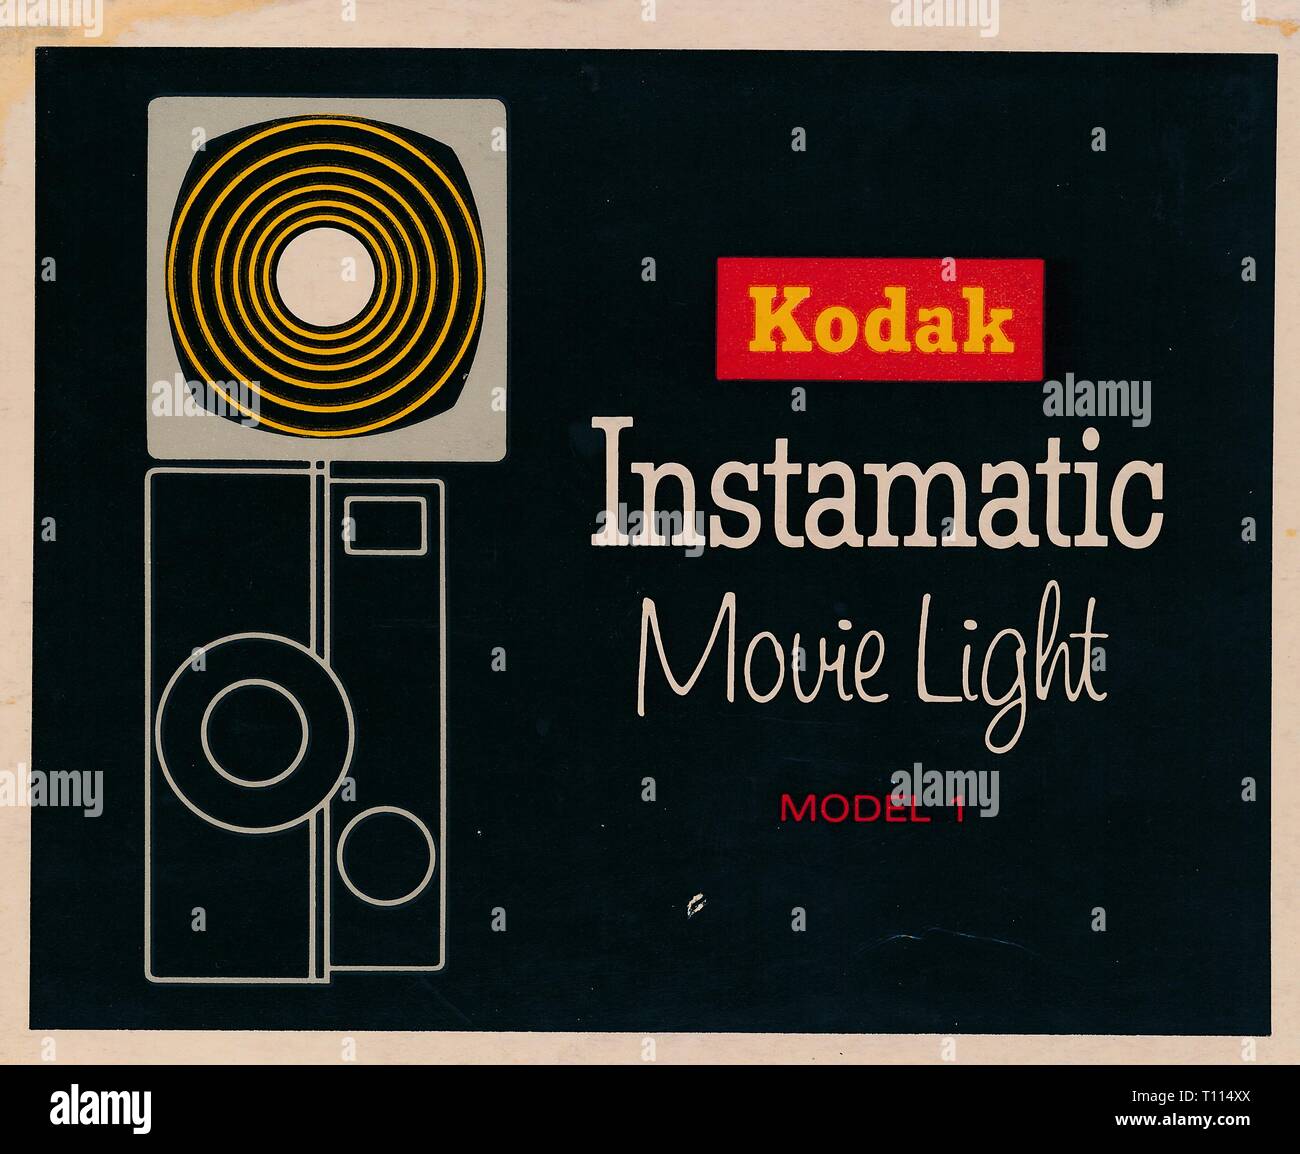 Product box label for the Kodak Instamatic Movie Light, an extremely bright light used with 8mm home movie cameras, including an illustration of the light installed on a camera, 1960. () Stock Photo